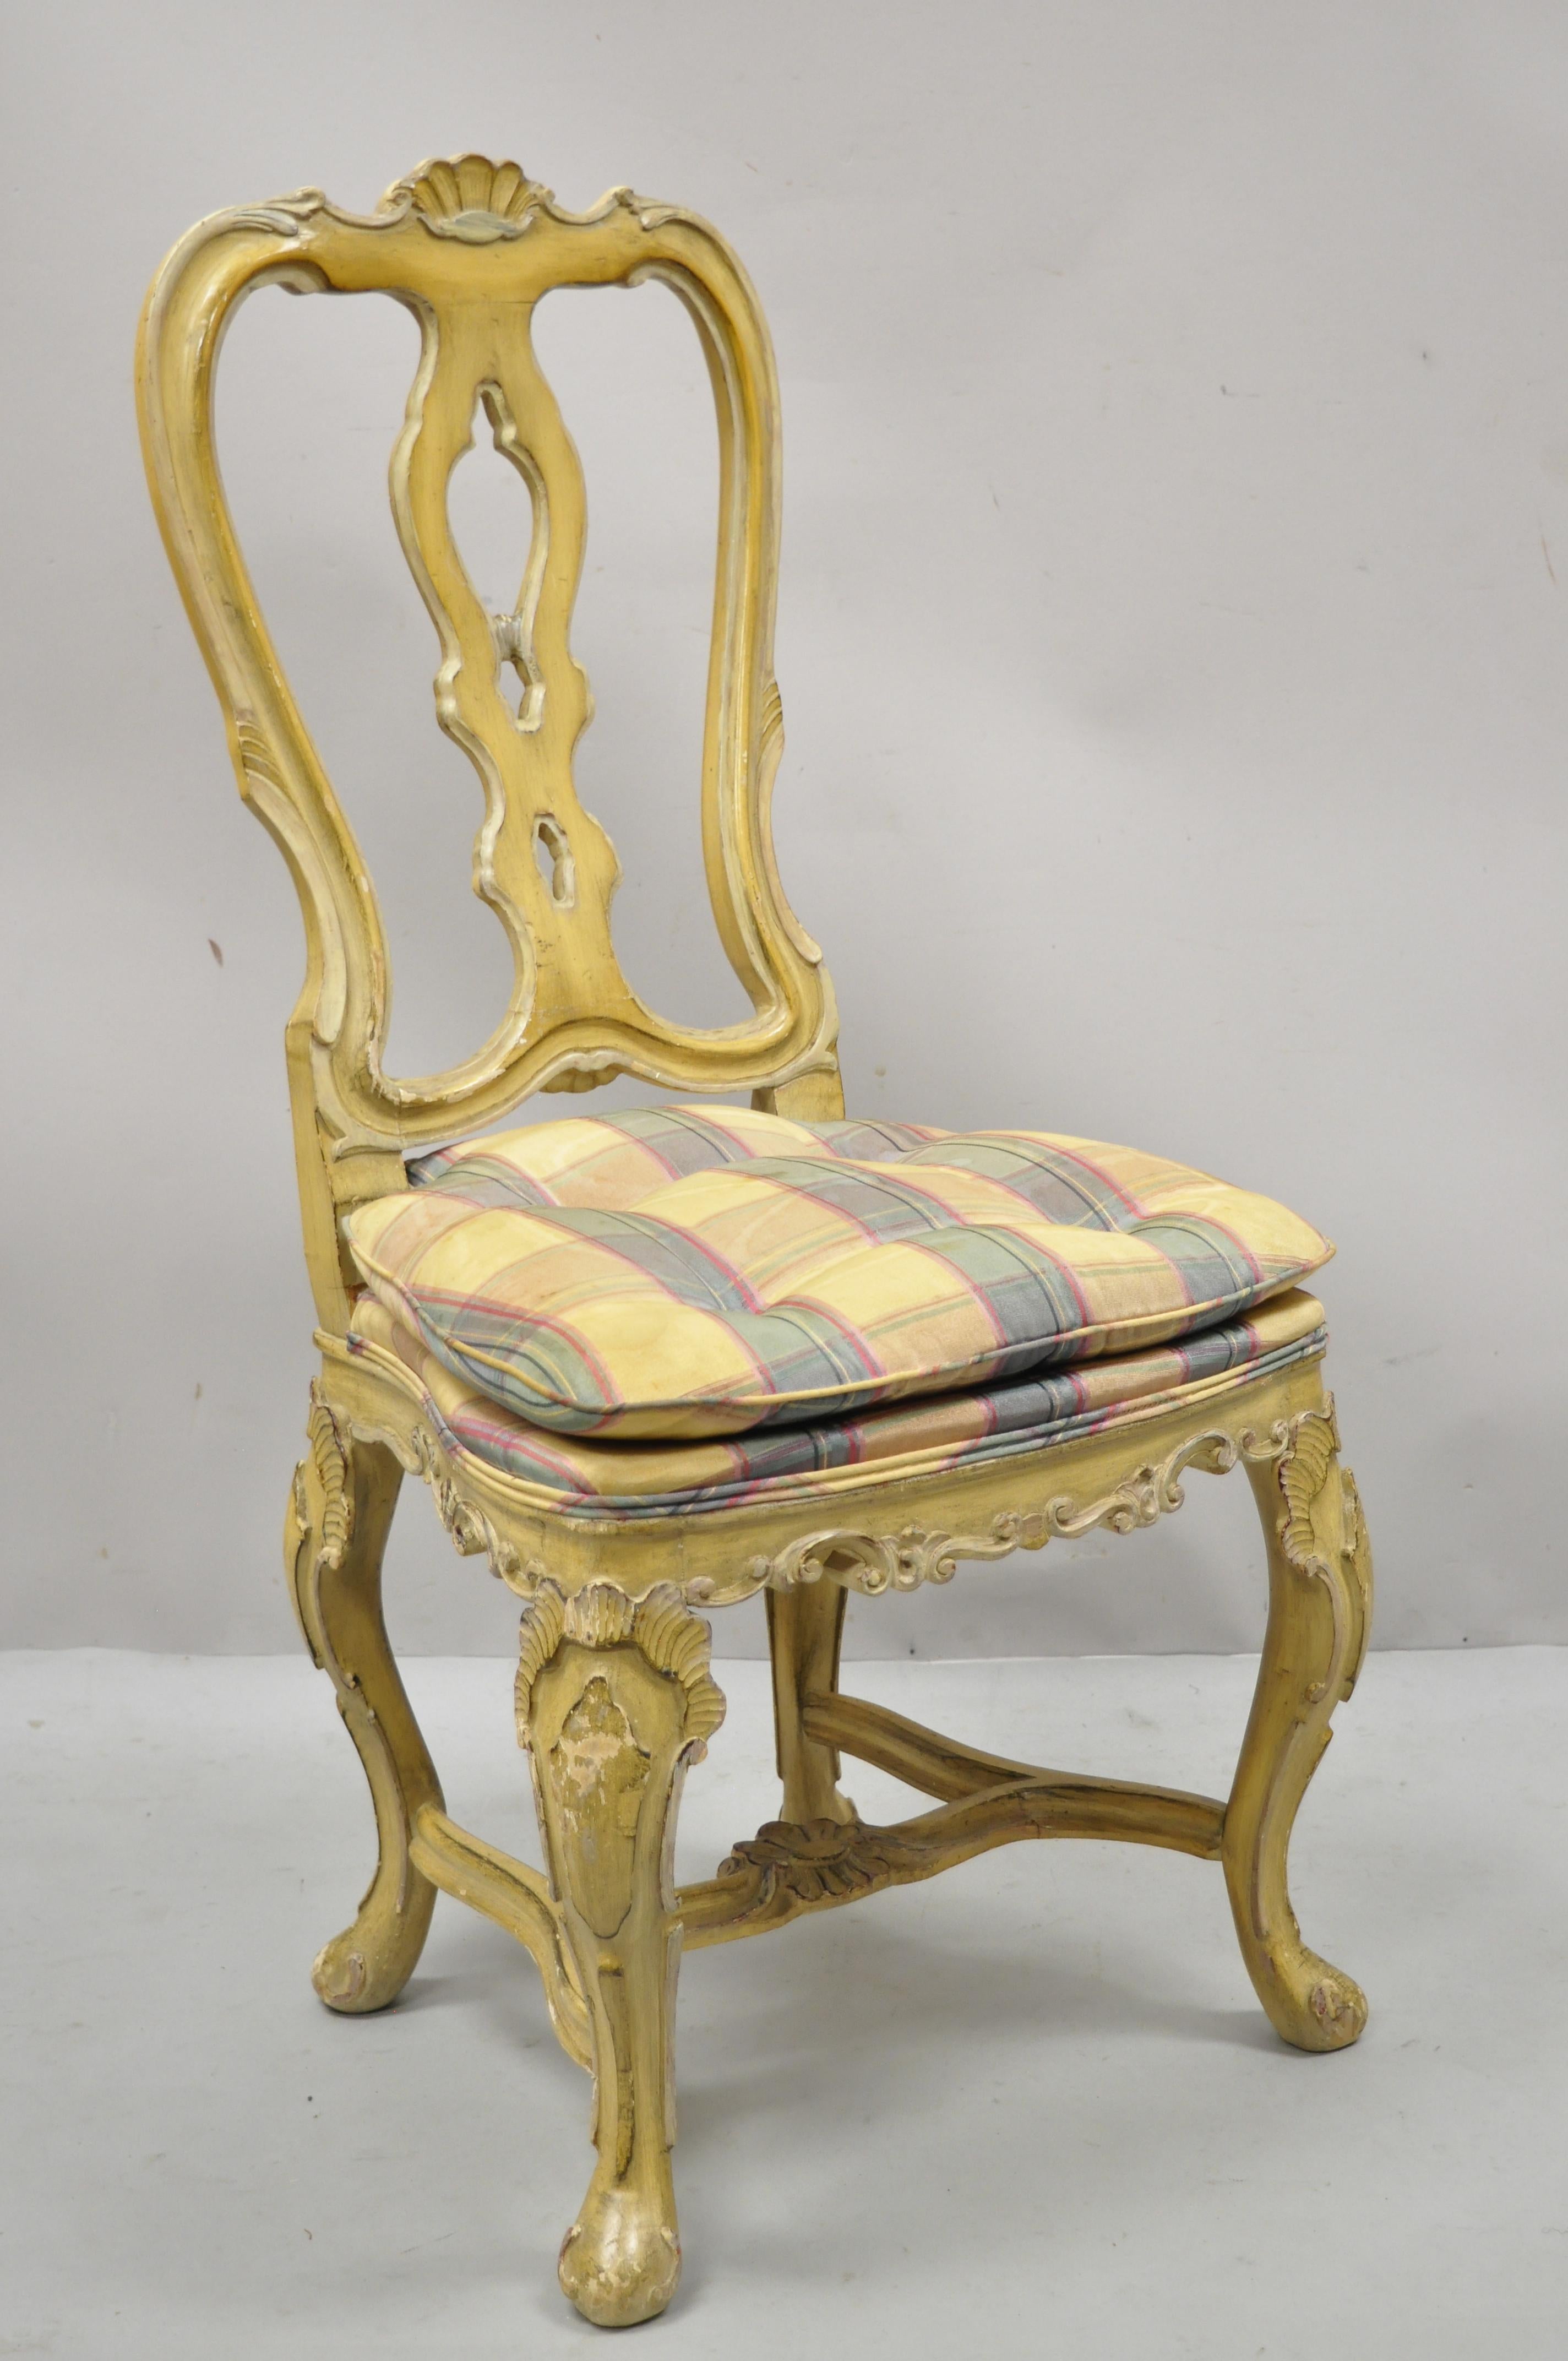 Vintage Italian Rococo Baroque style cream distress painted dining chairs, set of 4. Item features shell carved top rail, shell carved knees, stretcher base, distress painted finish, pretzel carved back, solid wood frame, upholstered seat, nicely